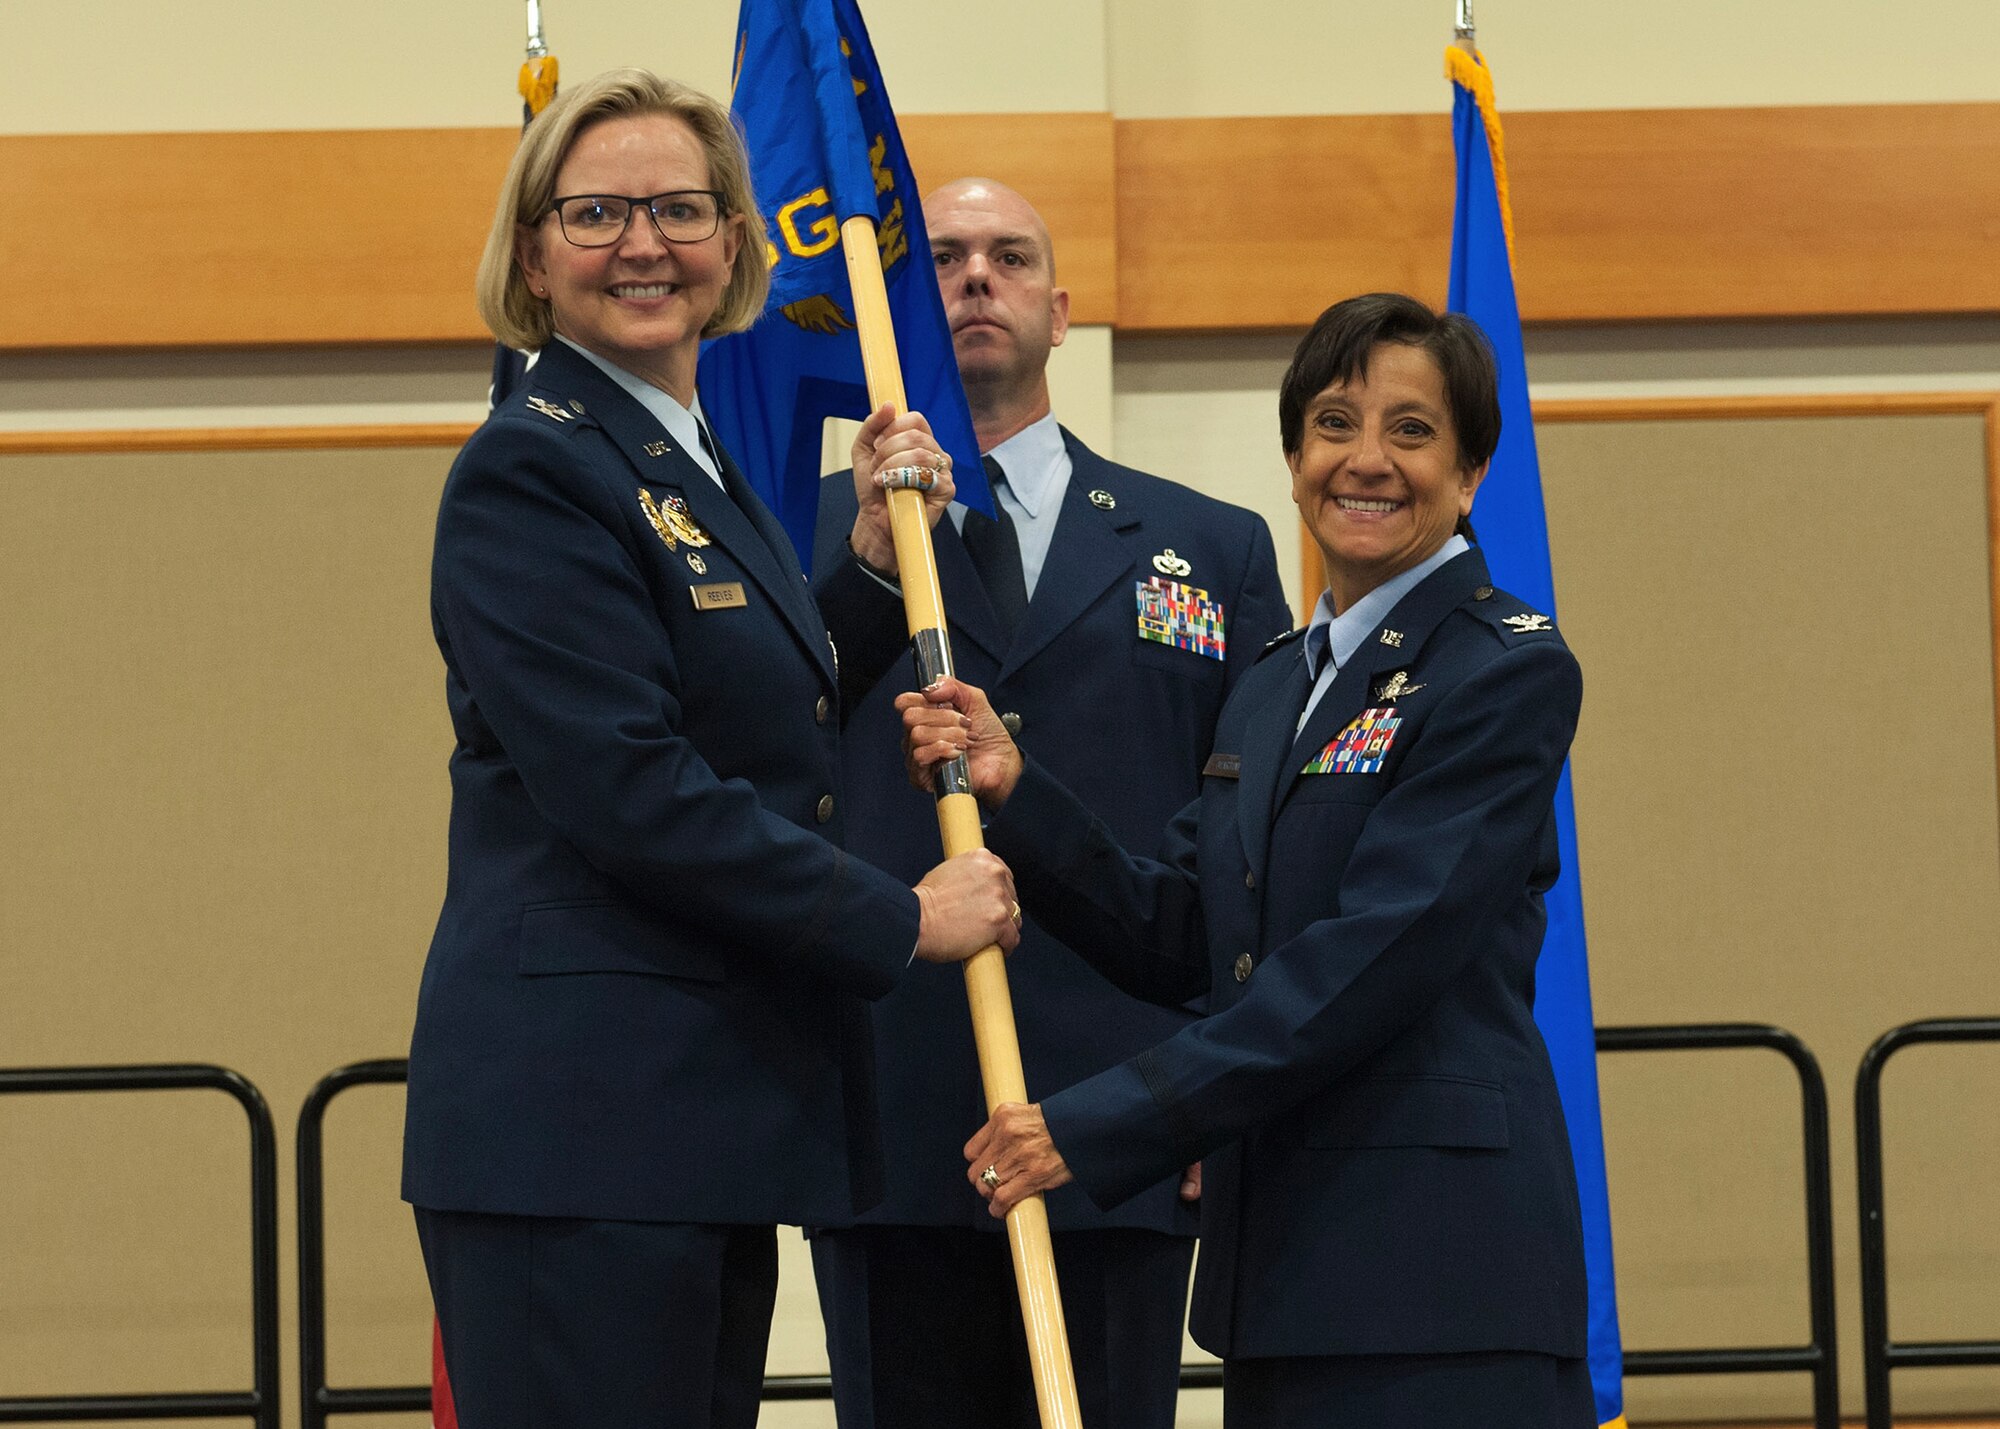 Col. Lisa Martinez, right, accepts command of the 341st Mission Support Group from Col. Jennifer Reeves, 341st Missile Wing commander during an assumption of command ceremony June 17, 2019, at Malmstrom Air Force Base, Mont. Guidon bearer Chief Master Sgt. Lance Blocher, 341st MSG group superintendent, looks on. (U.S. Air Force photo by John Turner)